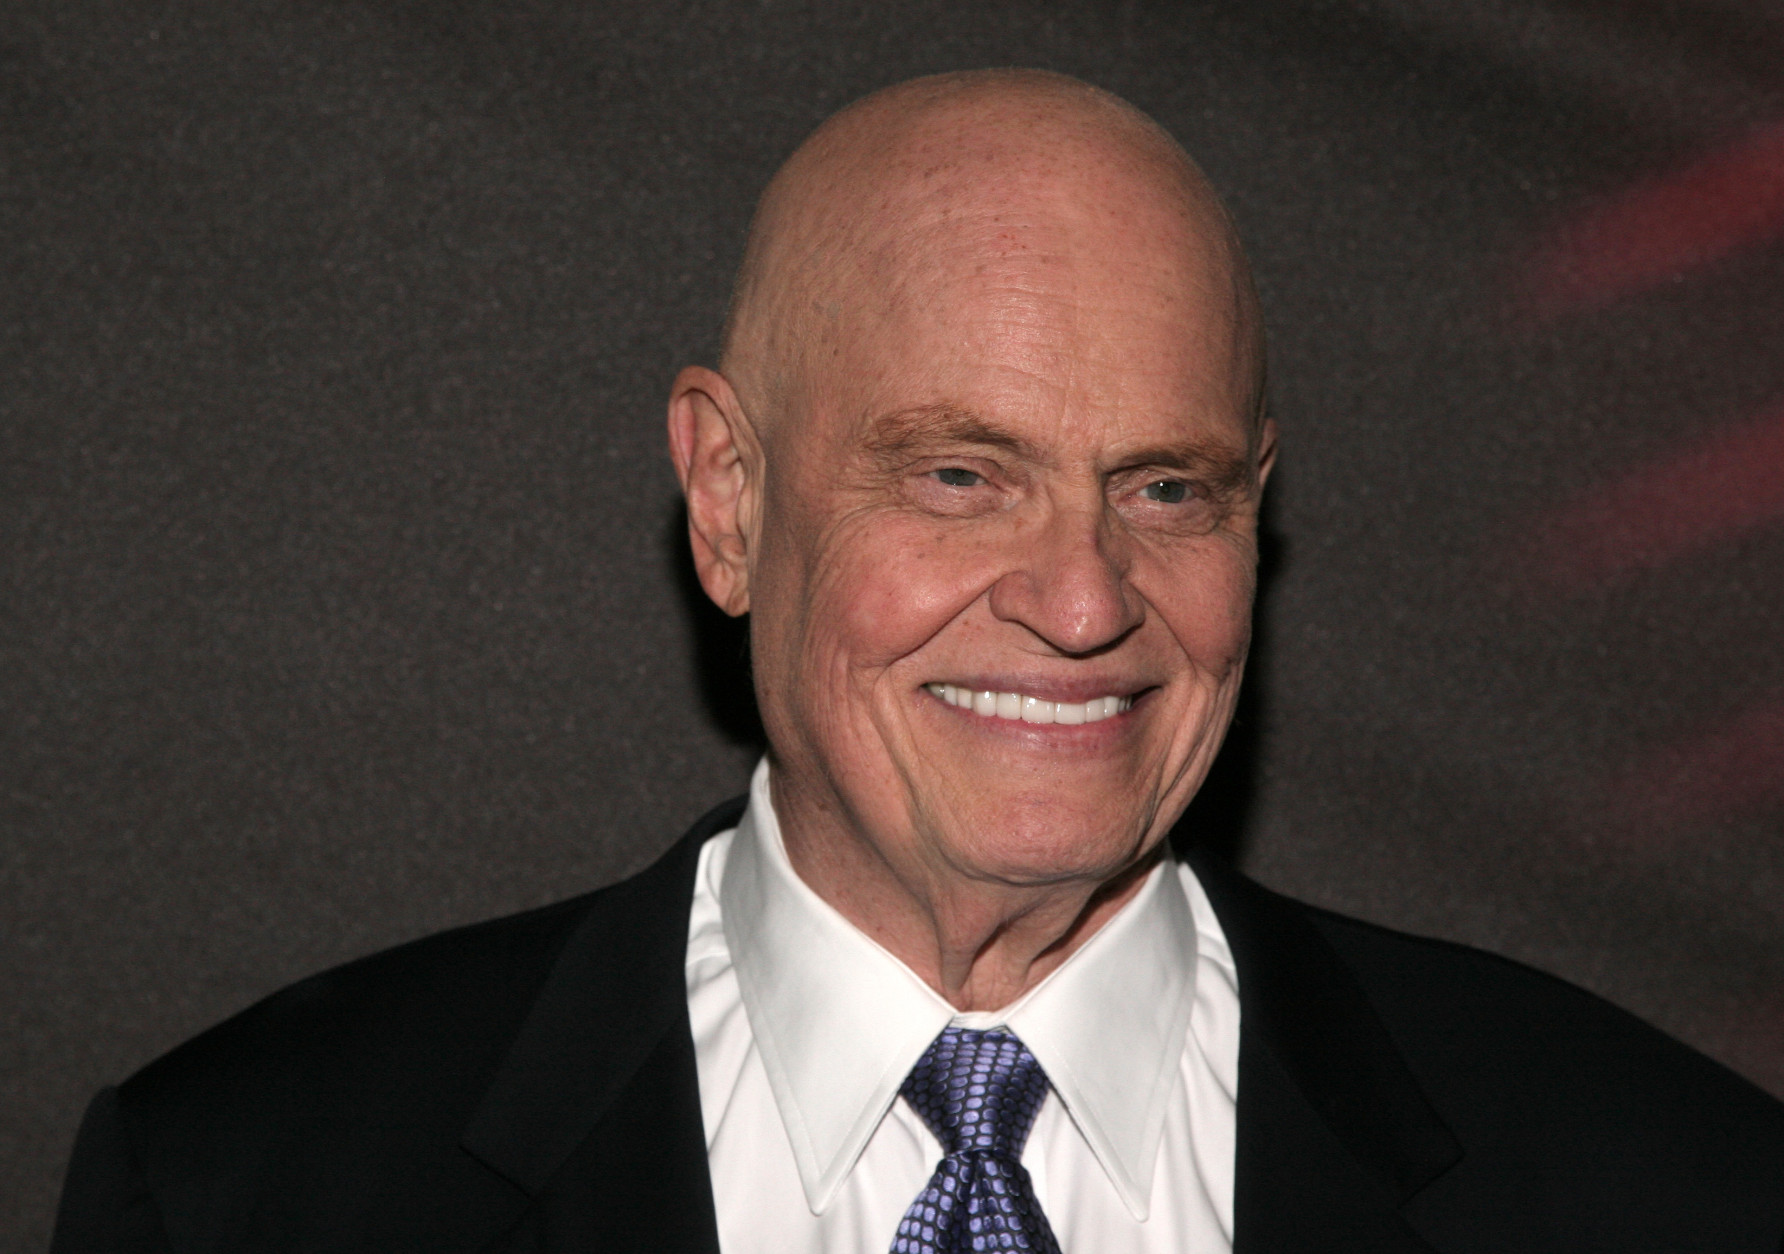 Actor and politician Fred Thompson attends the opening night party for "A Time To Kill" on Broadway on Sunday, Oct. 20, 2013 in New York. (Photo by Andy Kropa/Invision/AP)